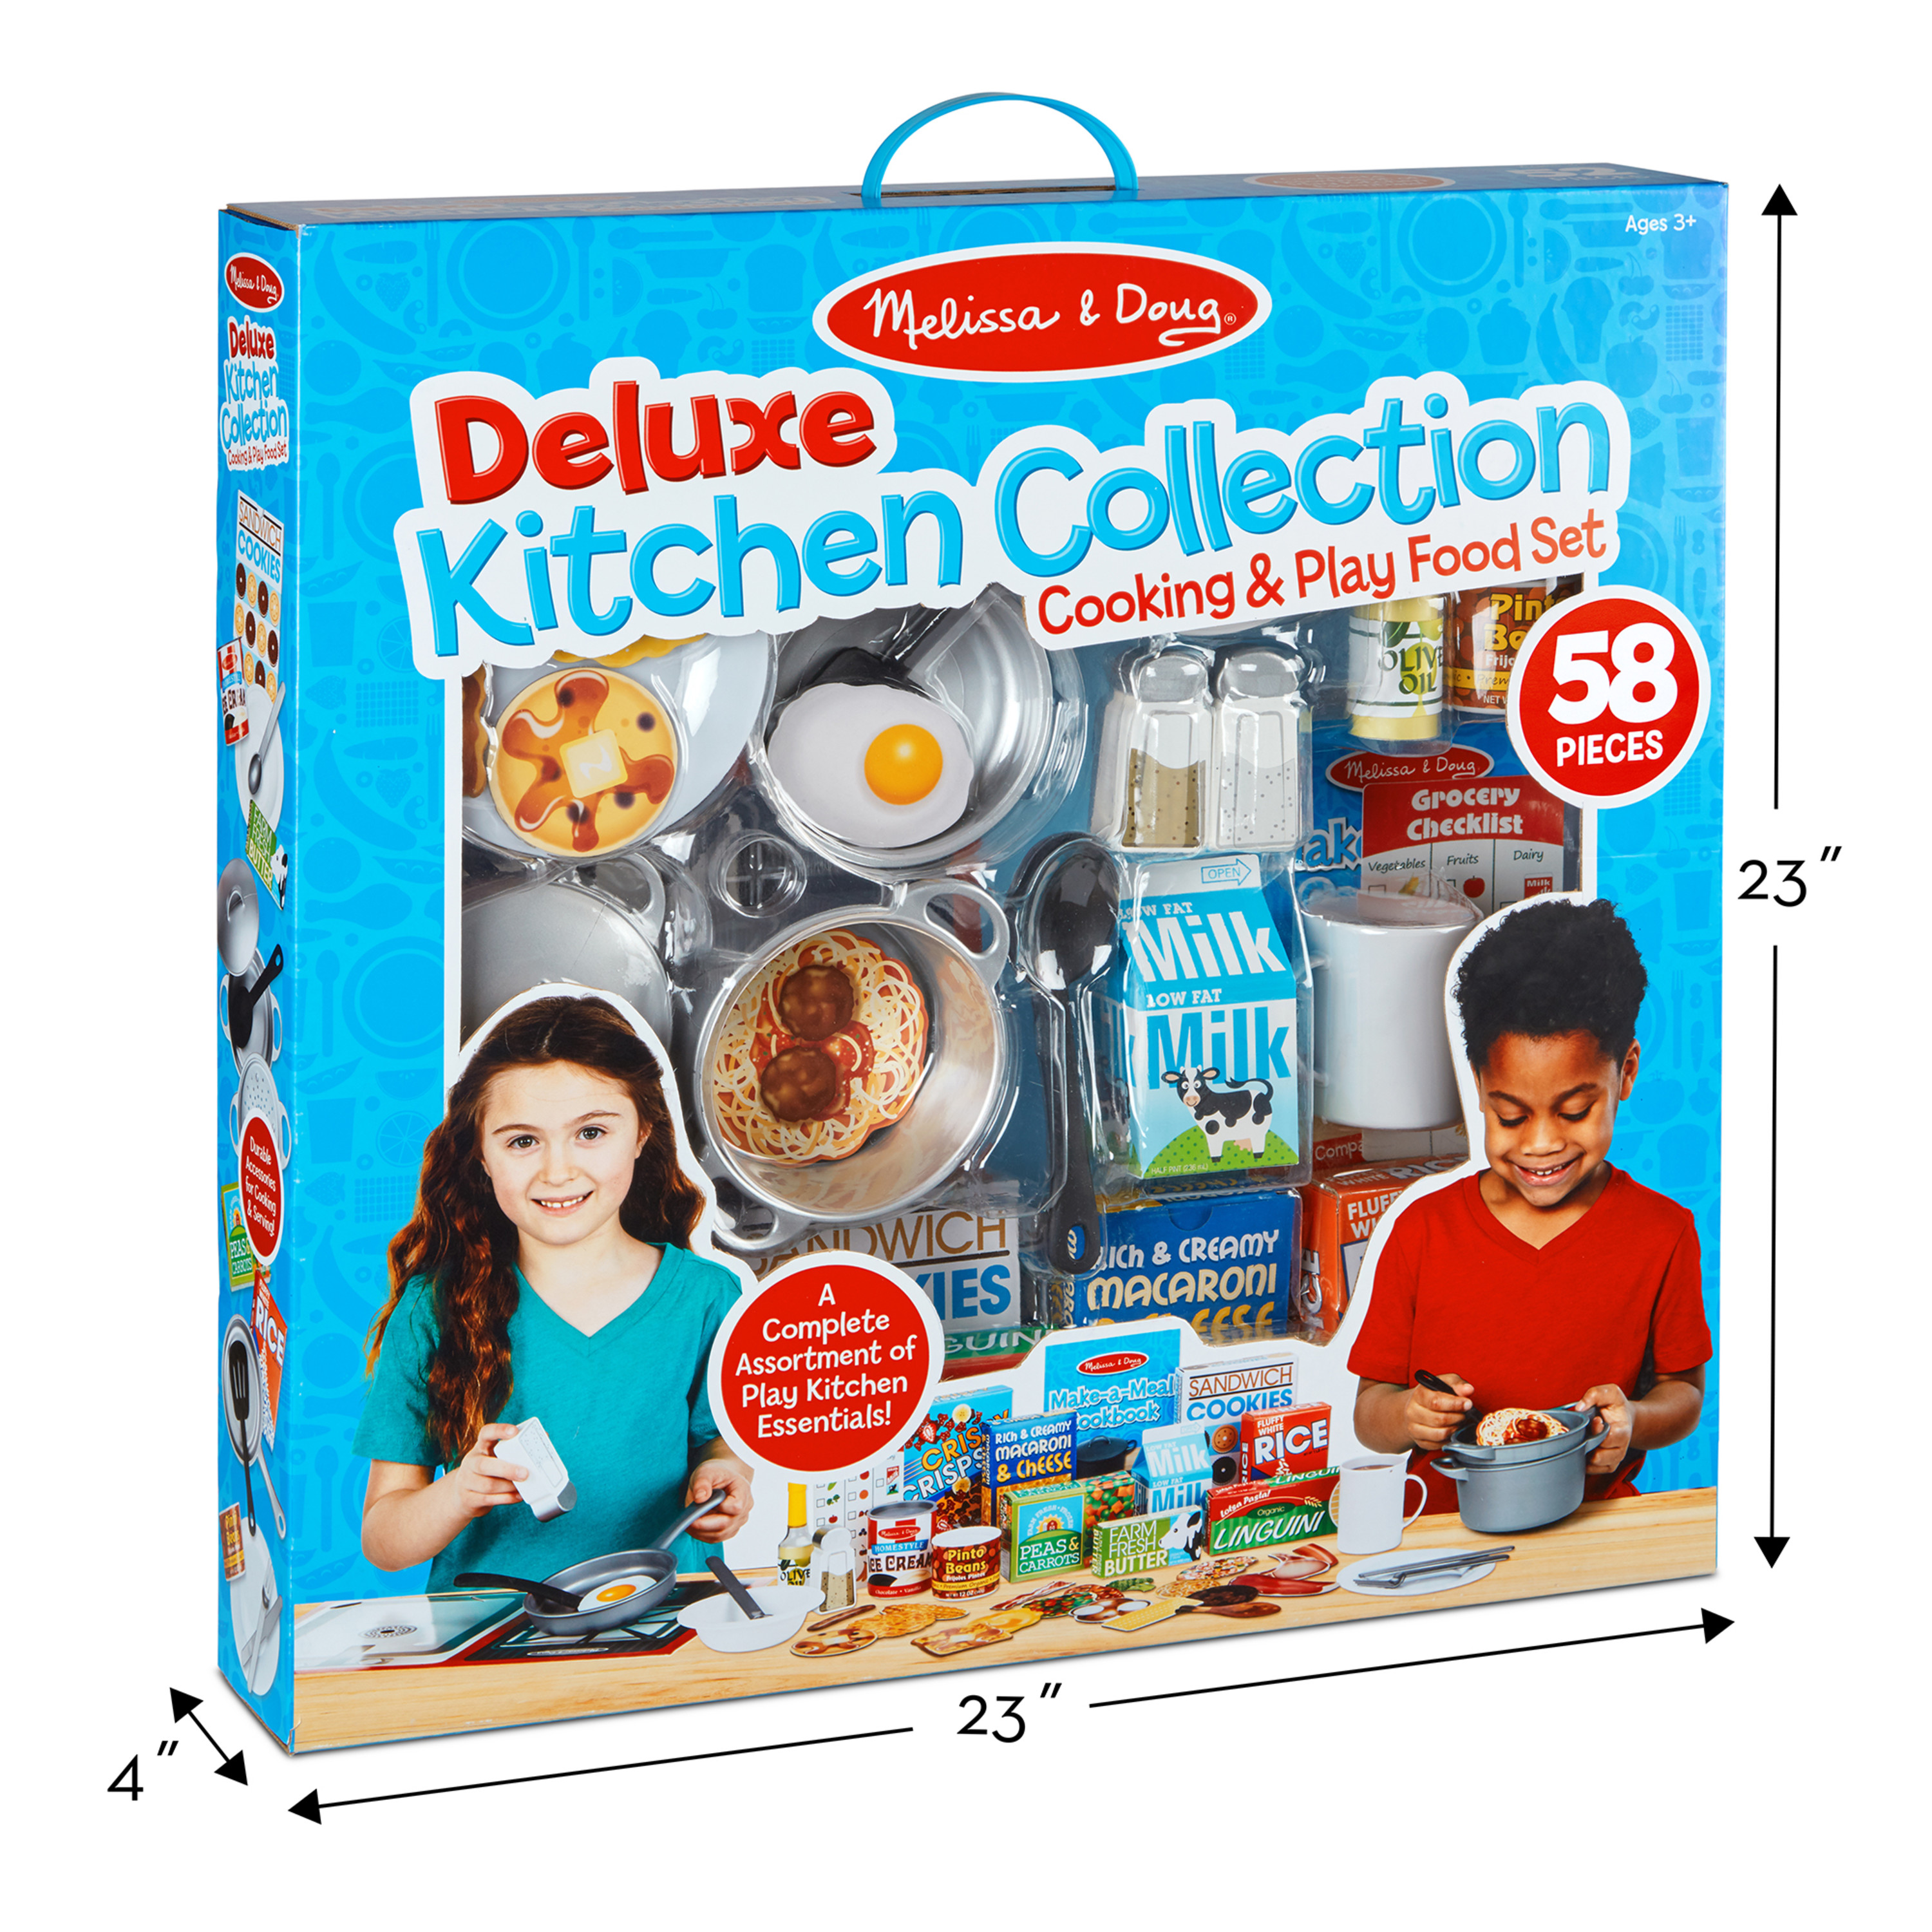 Melissa & Doug Deluxe Kitchen Collection Cooking & Play Food Set – 58 Pieces - image 4 of 10